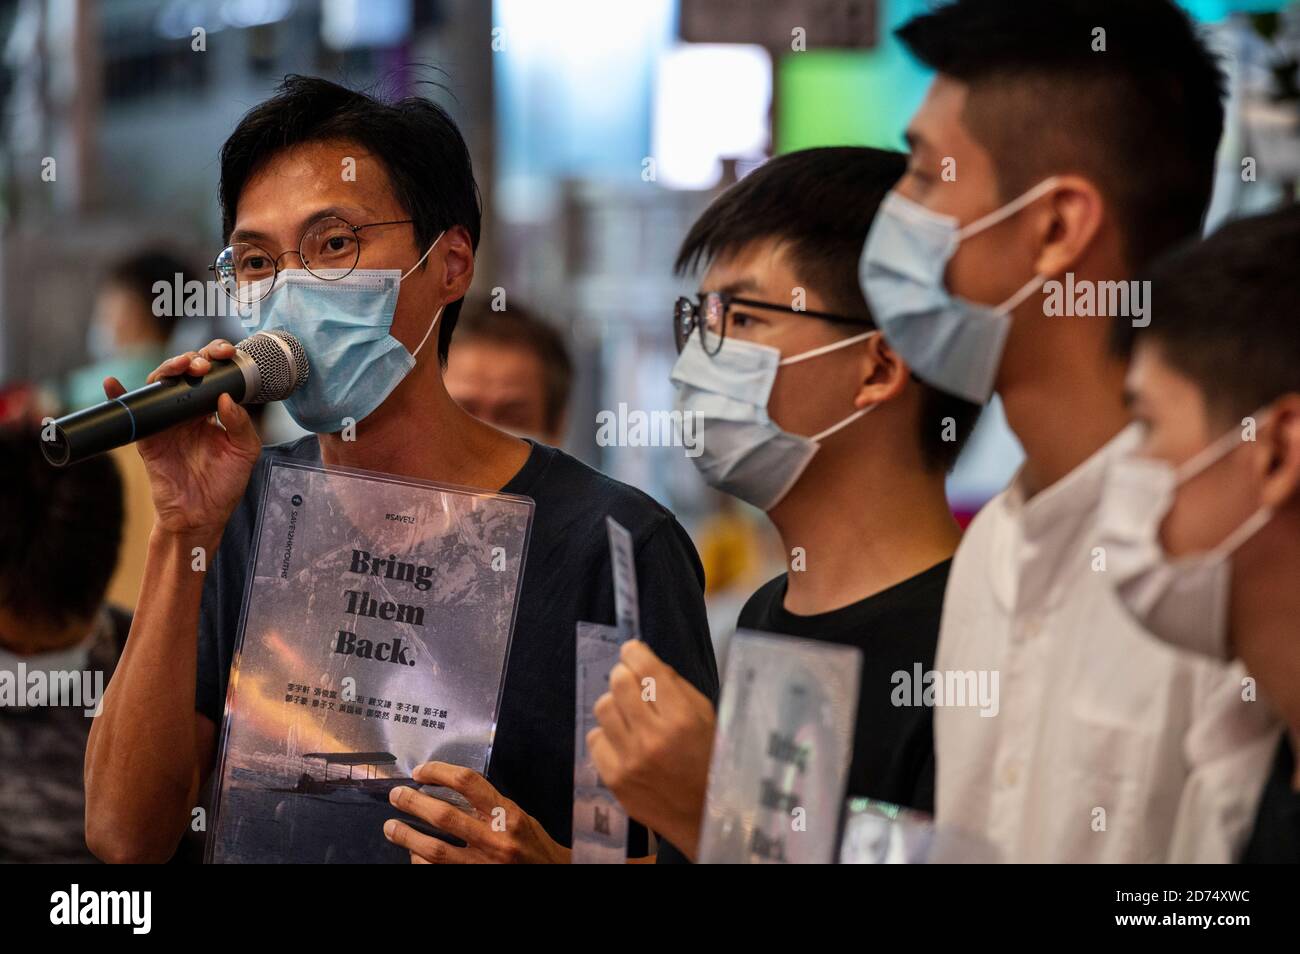 Pro-democracy activists Eddie Chu (L), Joshua Wong (L2), Owen Chow (R2), and Lester Shum (R) distribute leaflets while talking to the press in support of the 12 activists detained in Mainland China during the rally.Pro democracy activates rally in Hong Kong in support of the 12 Hongkongers detained in Mainland China after allegedly trying to flee to Taiwan to claim political asylum in August 2020. The 12 detainees has committed different political crimes in Hong Kong and were on court bail when they fled. Stock Photo